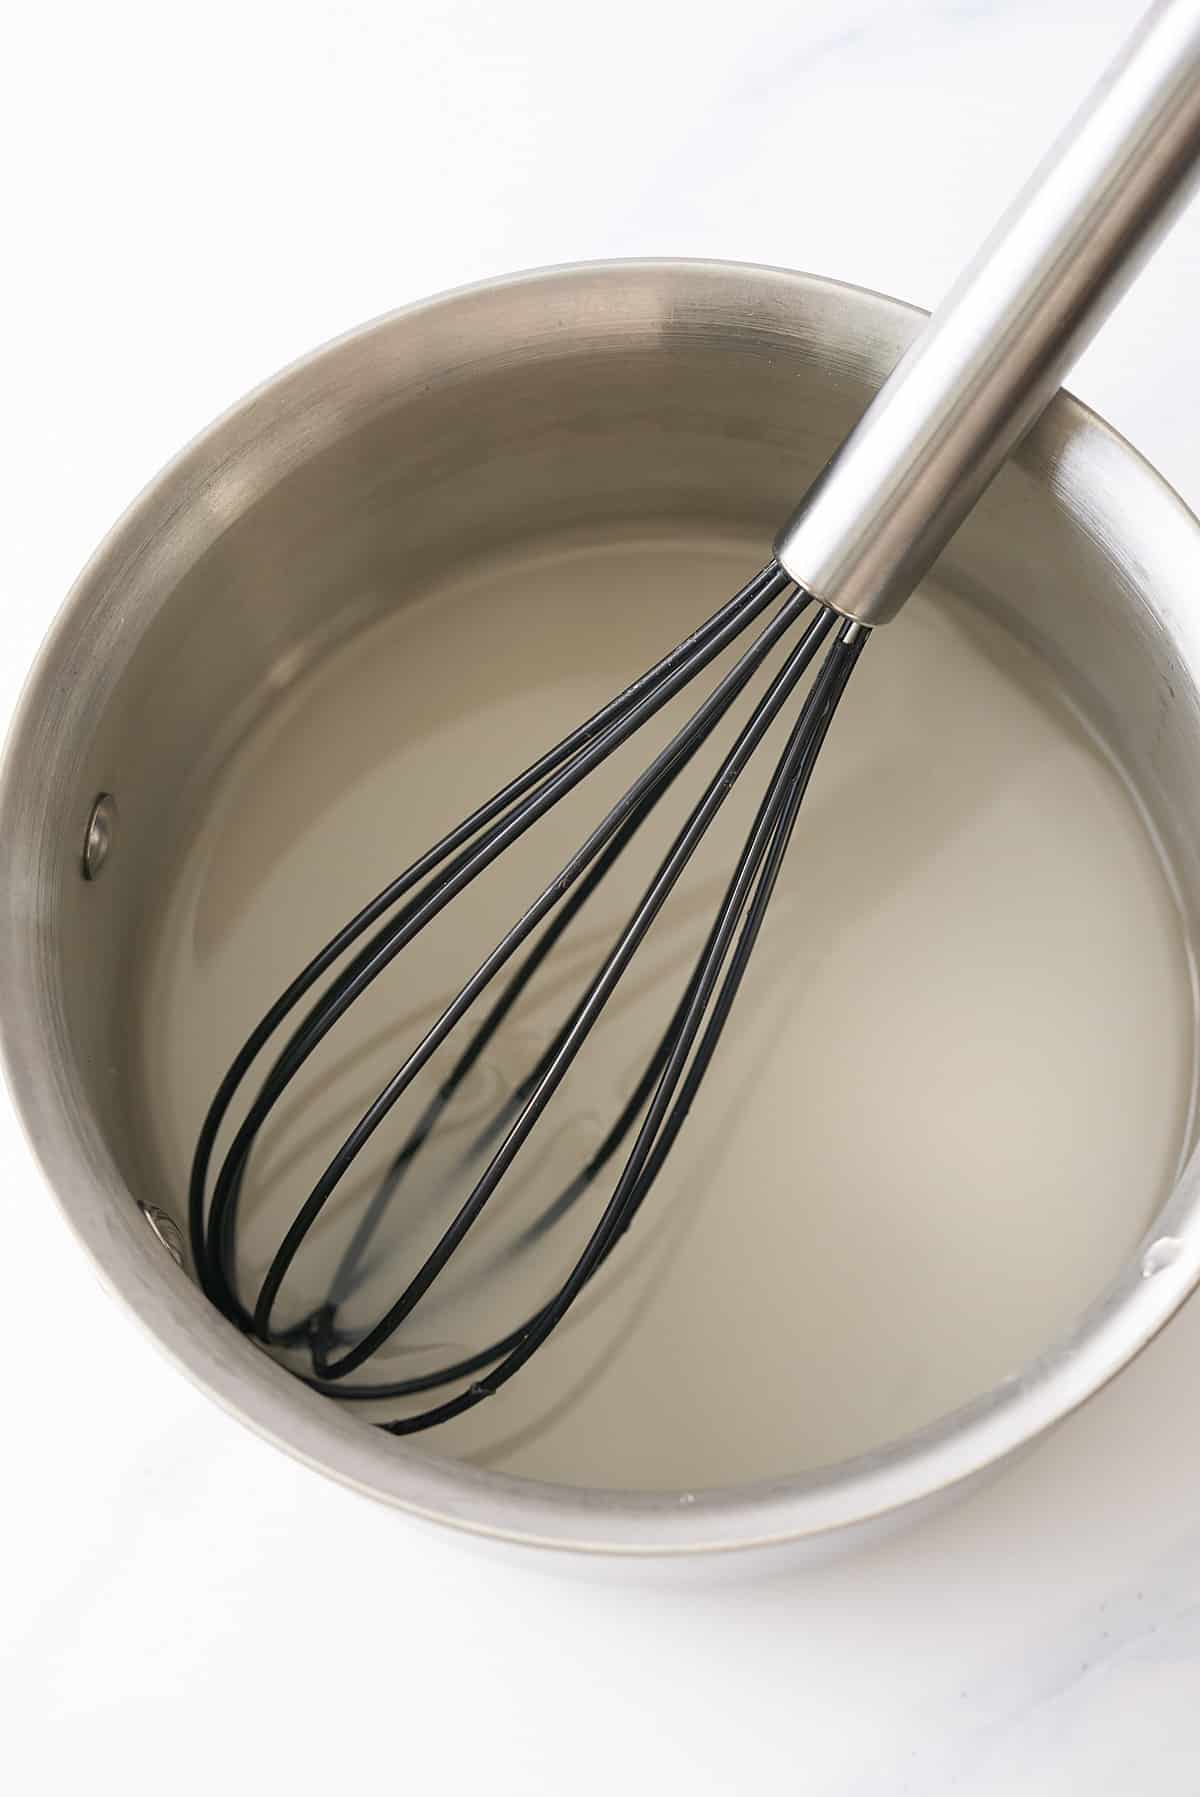 A saucepan filled with water and granulated sugar with a whisk.